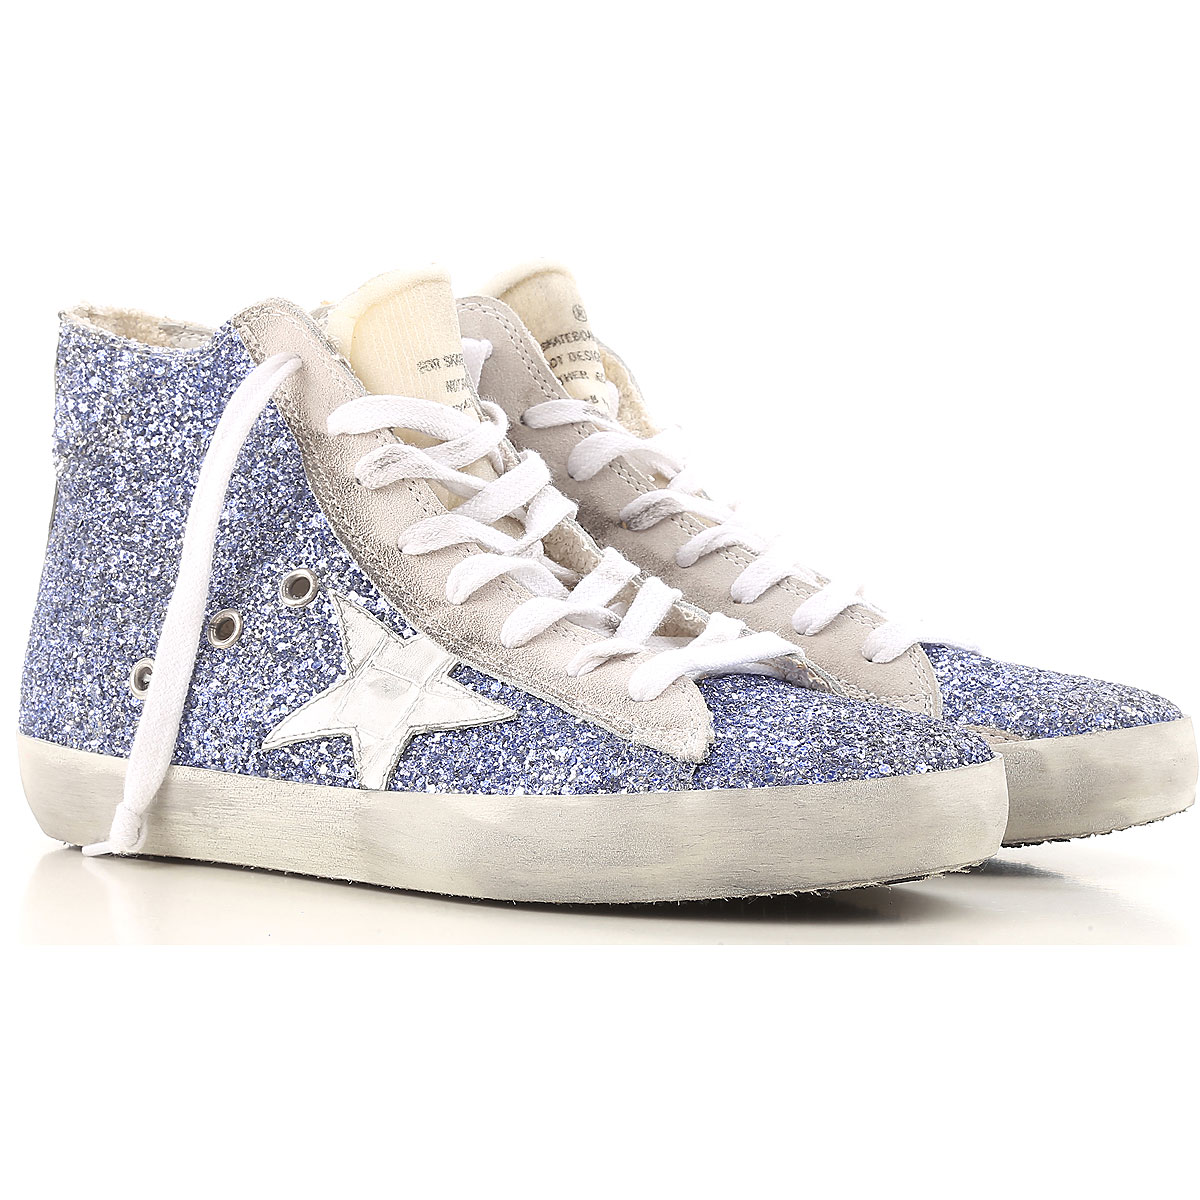 Womens Shoes Golden Goose, Style code: g32ws591-b26-